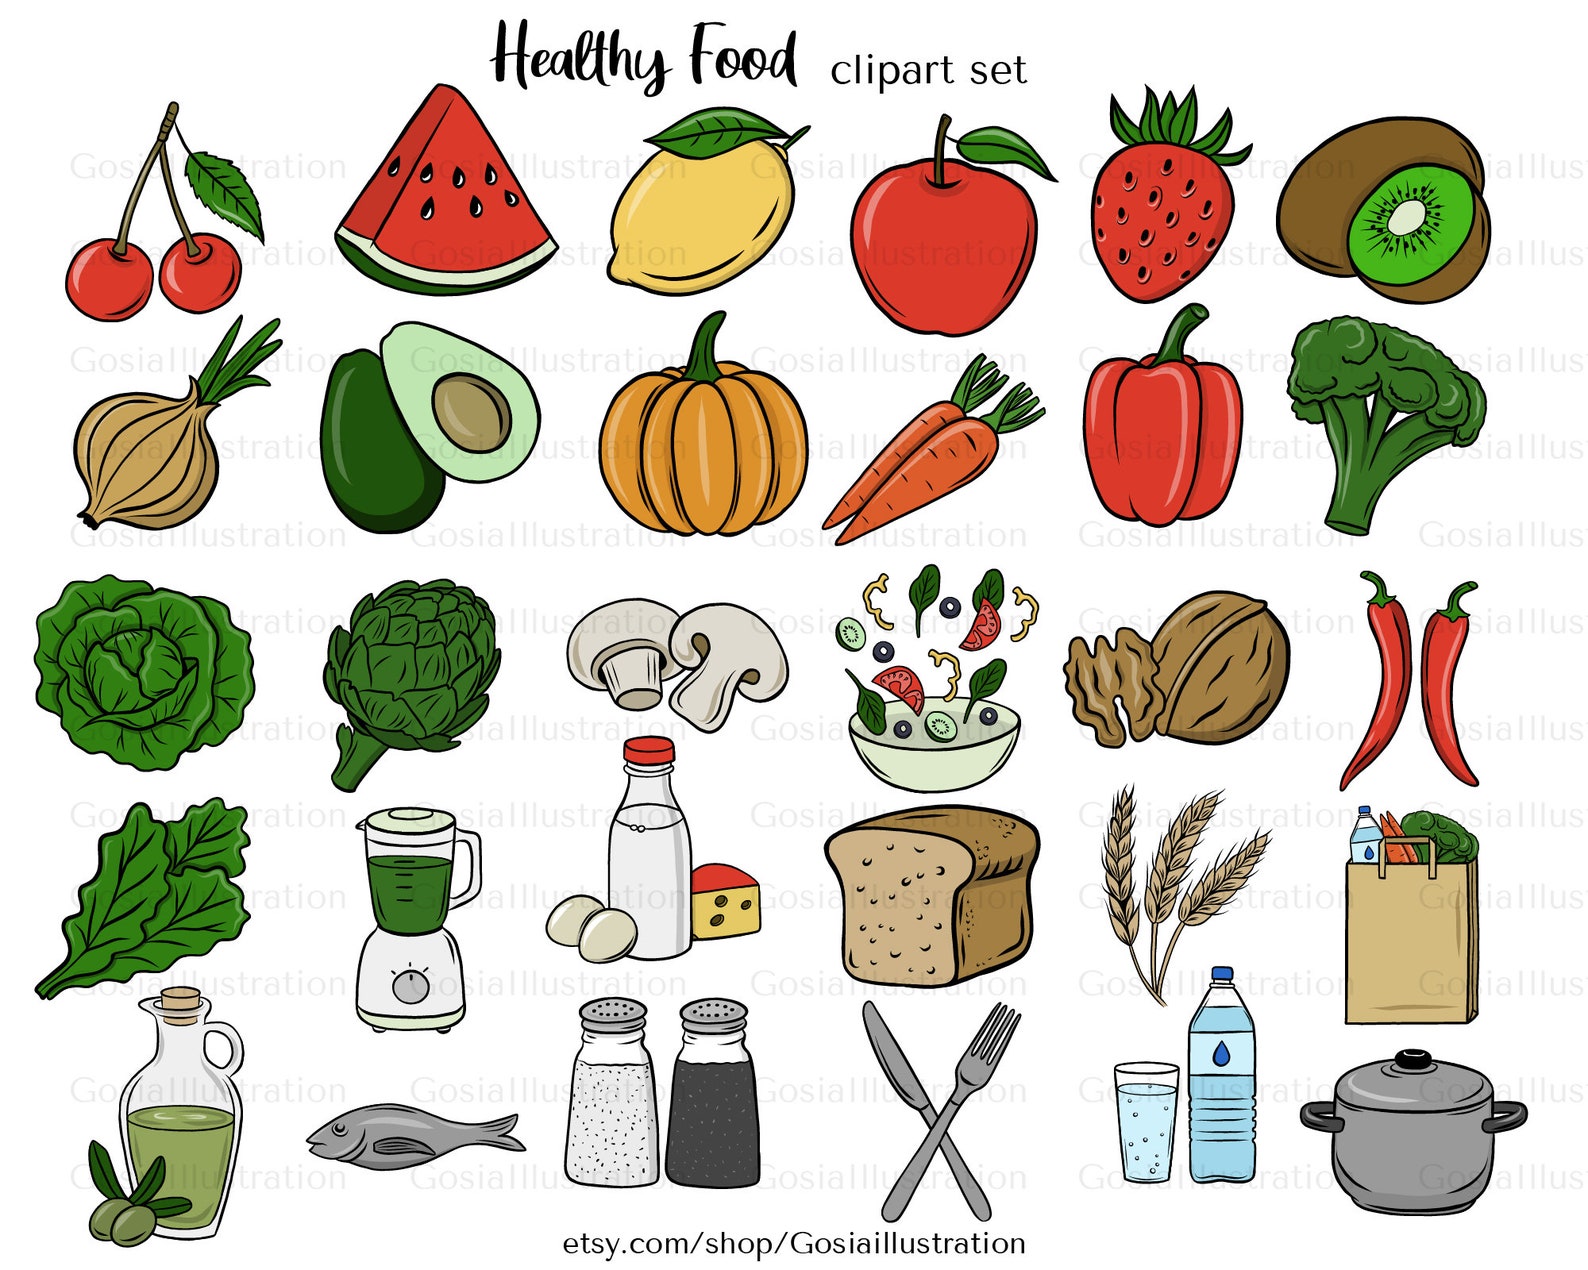 Healthy food clipart set hand drawn food clipart Fruits and - Etsy Polska